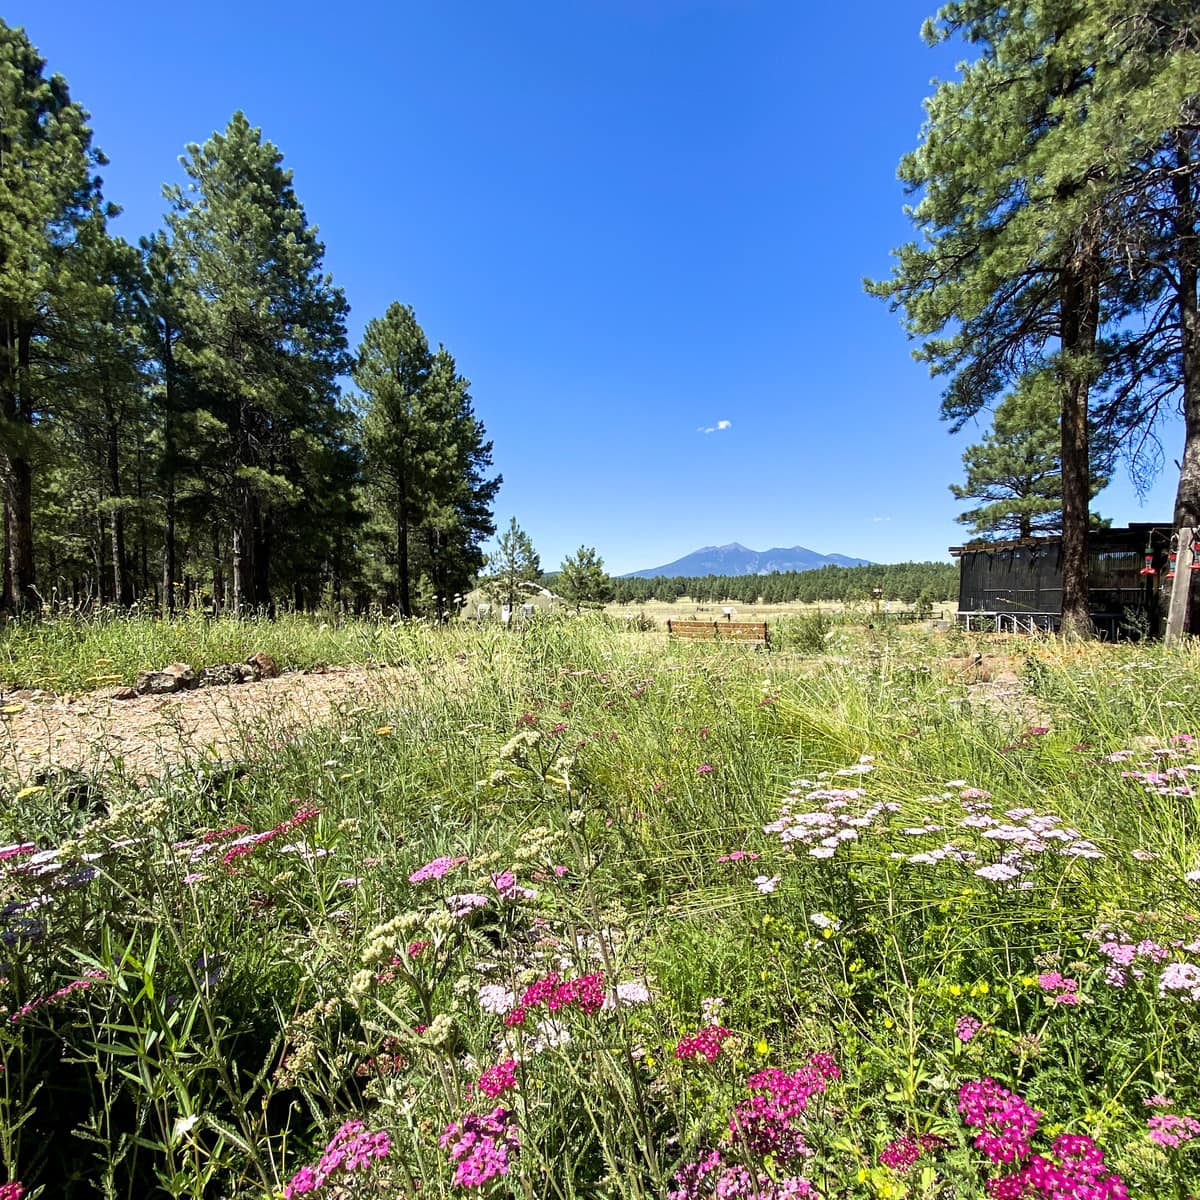 30 Things to Do in Flagstaff in Northern Arizona